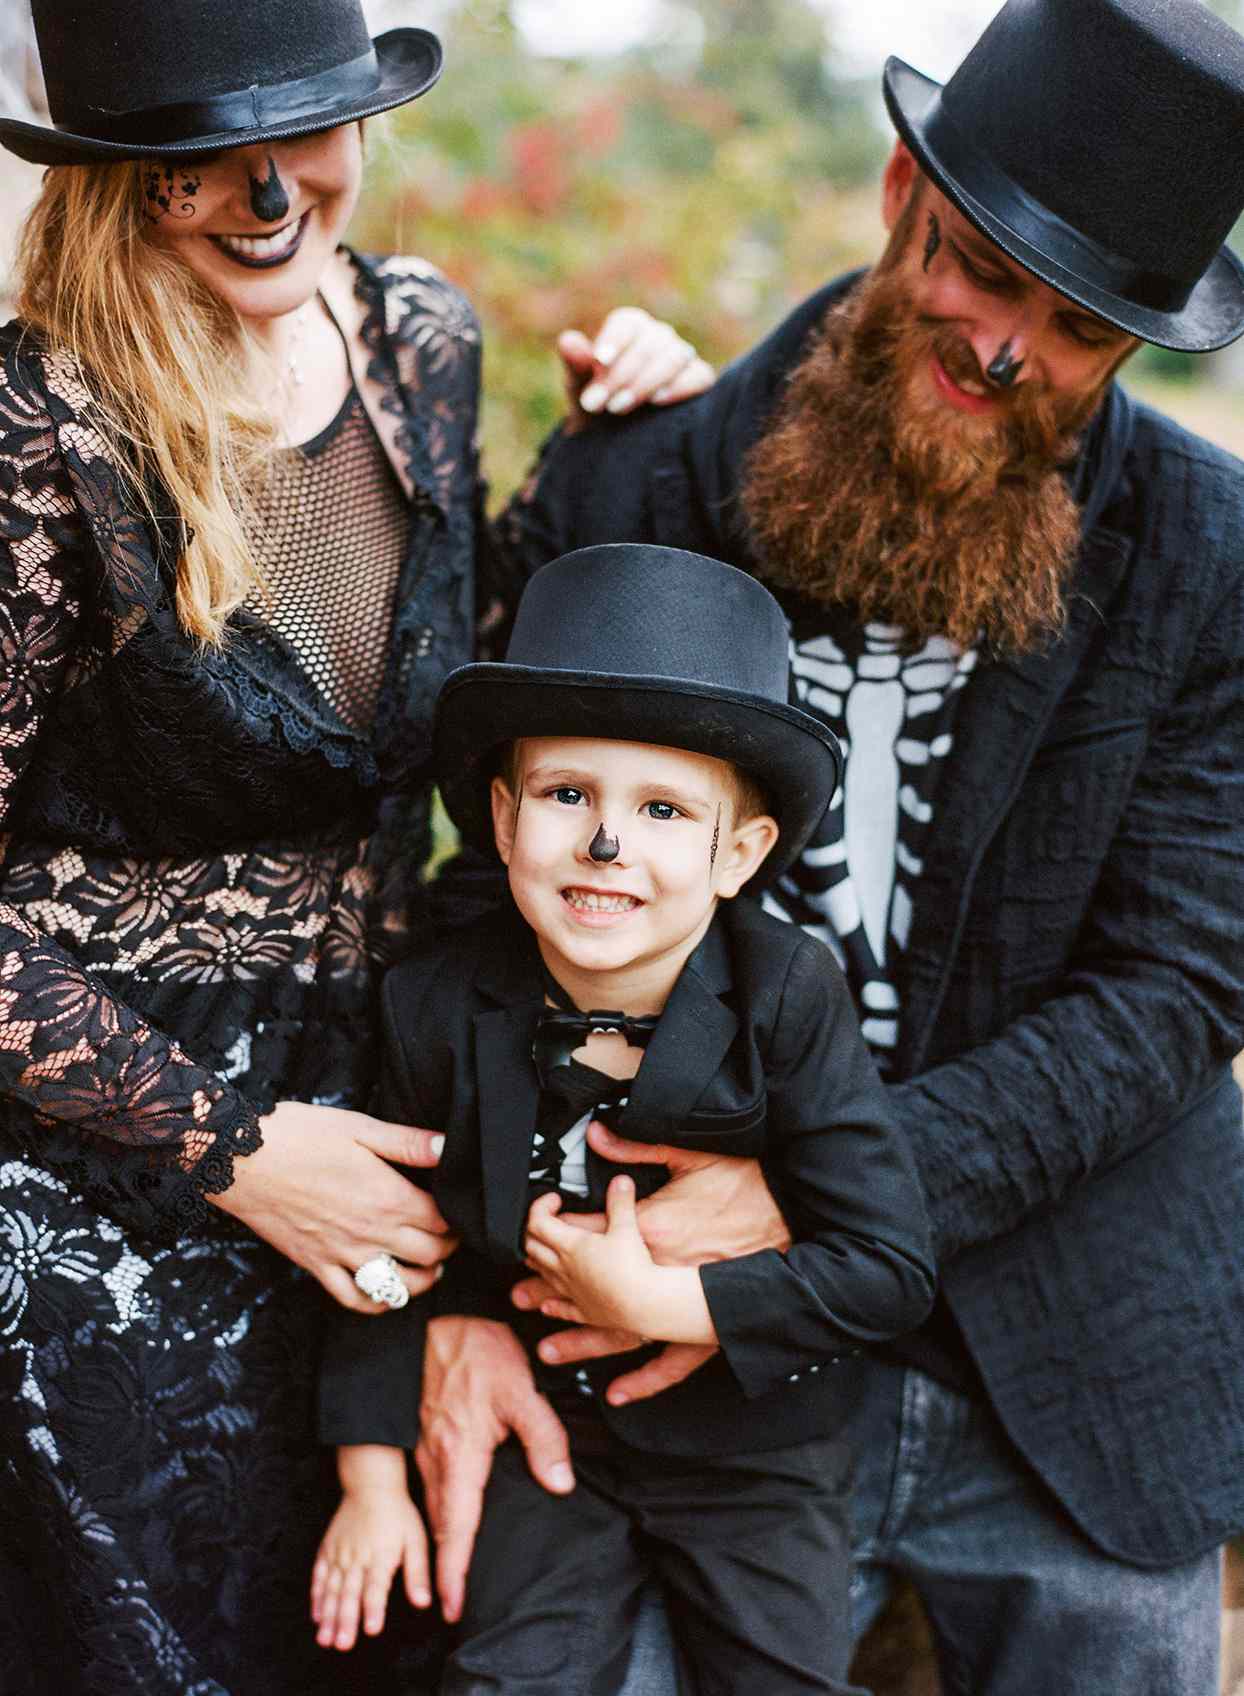 family in halloween masquerade costumes